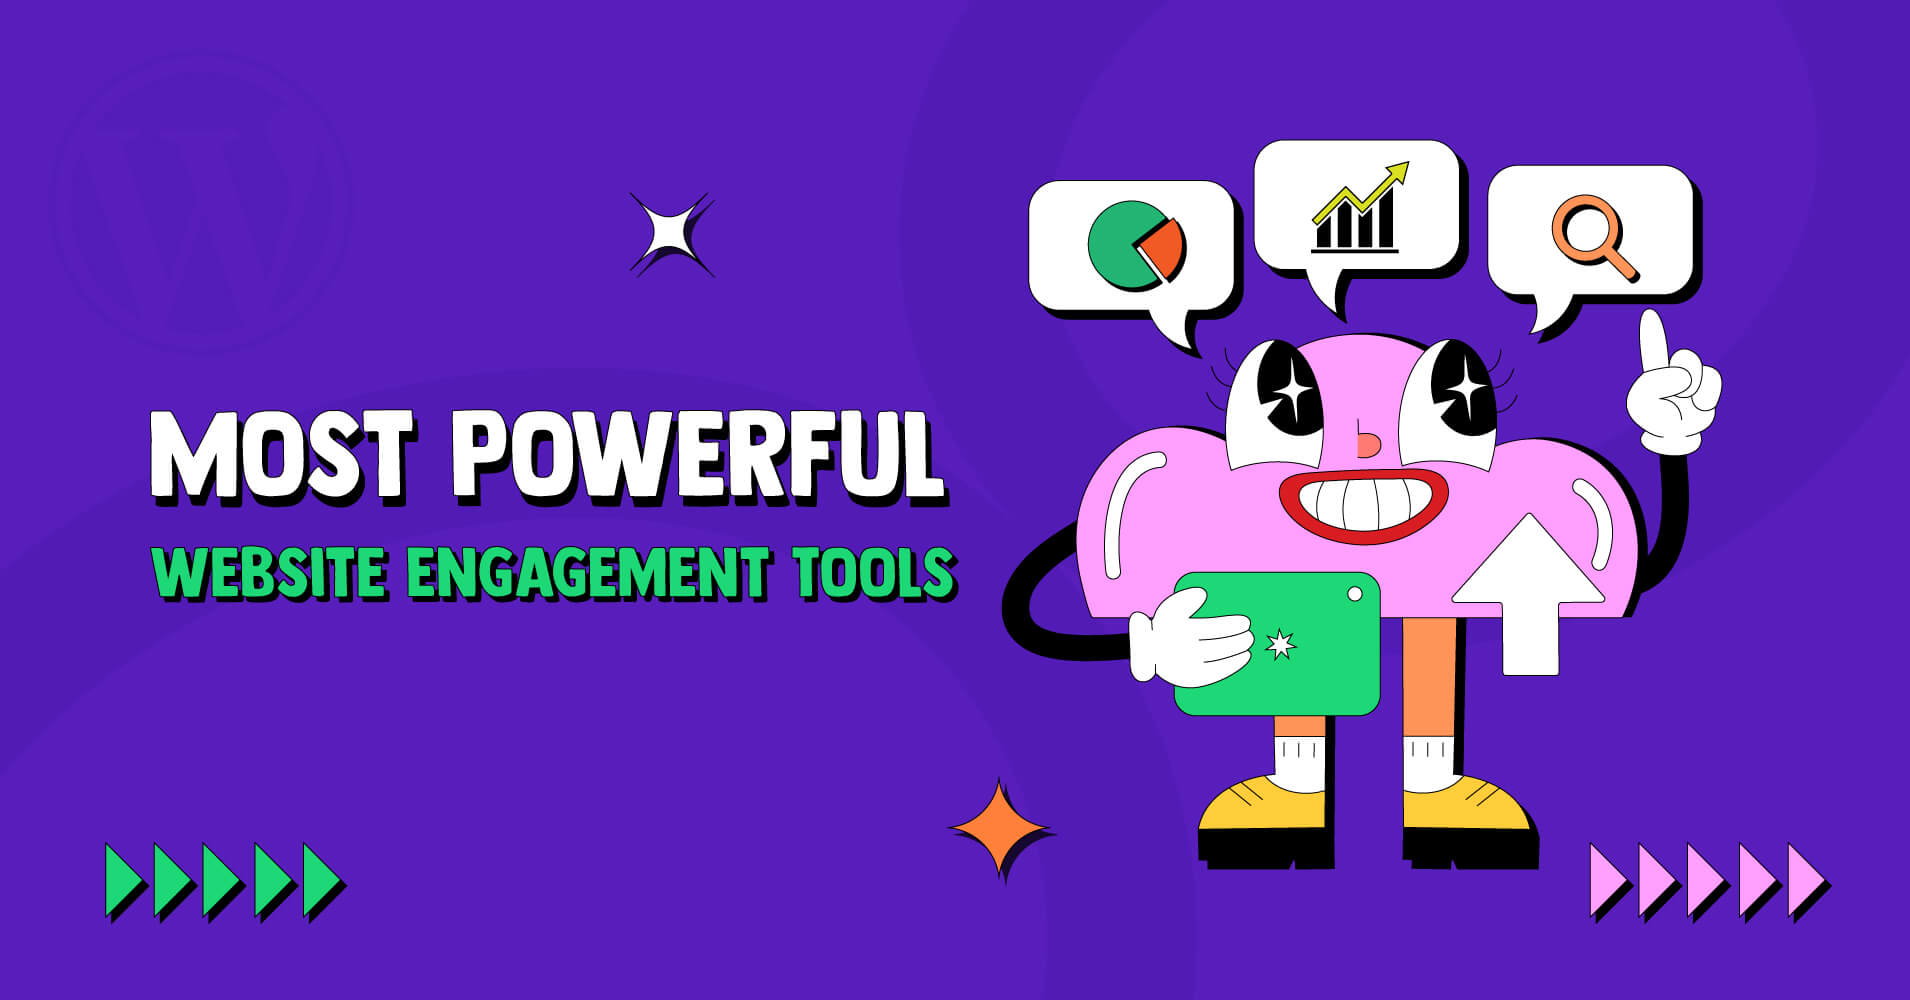 9 Most Powerful Website Engagement Tools for 2023